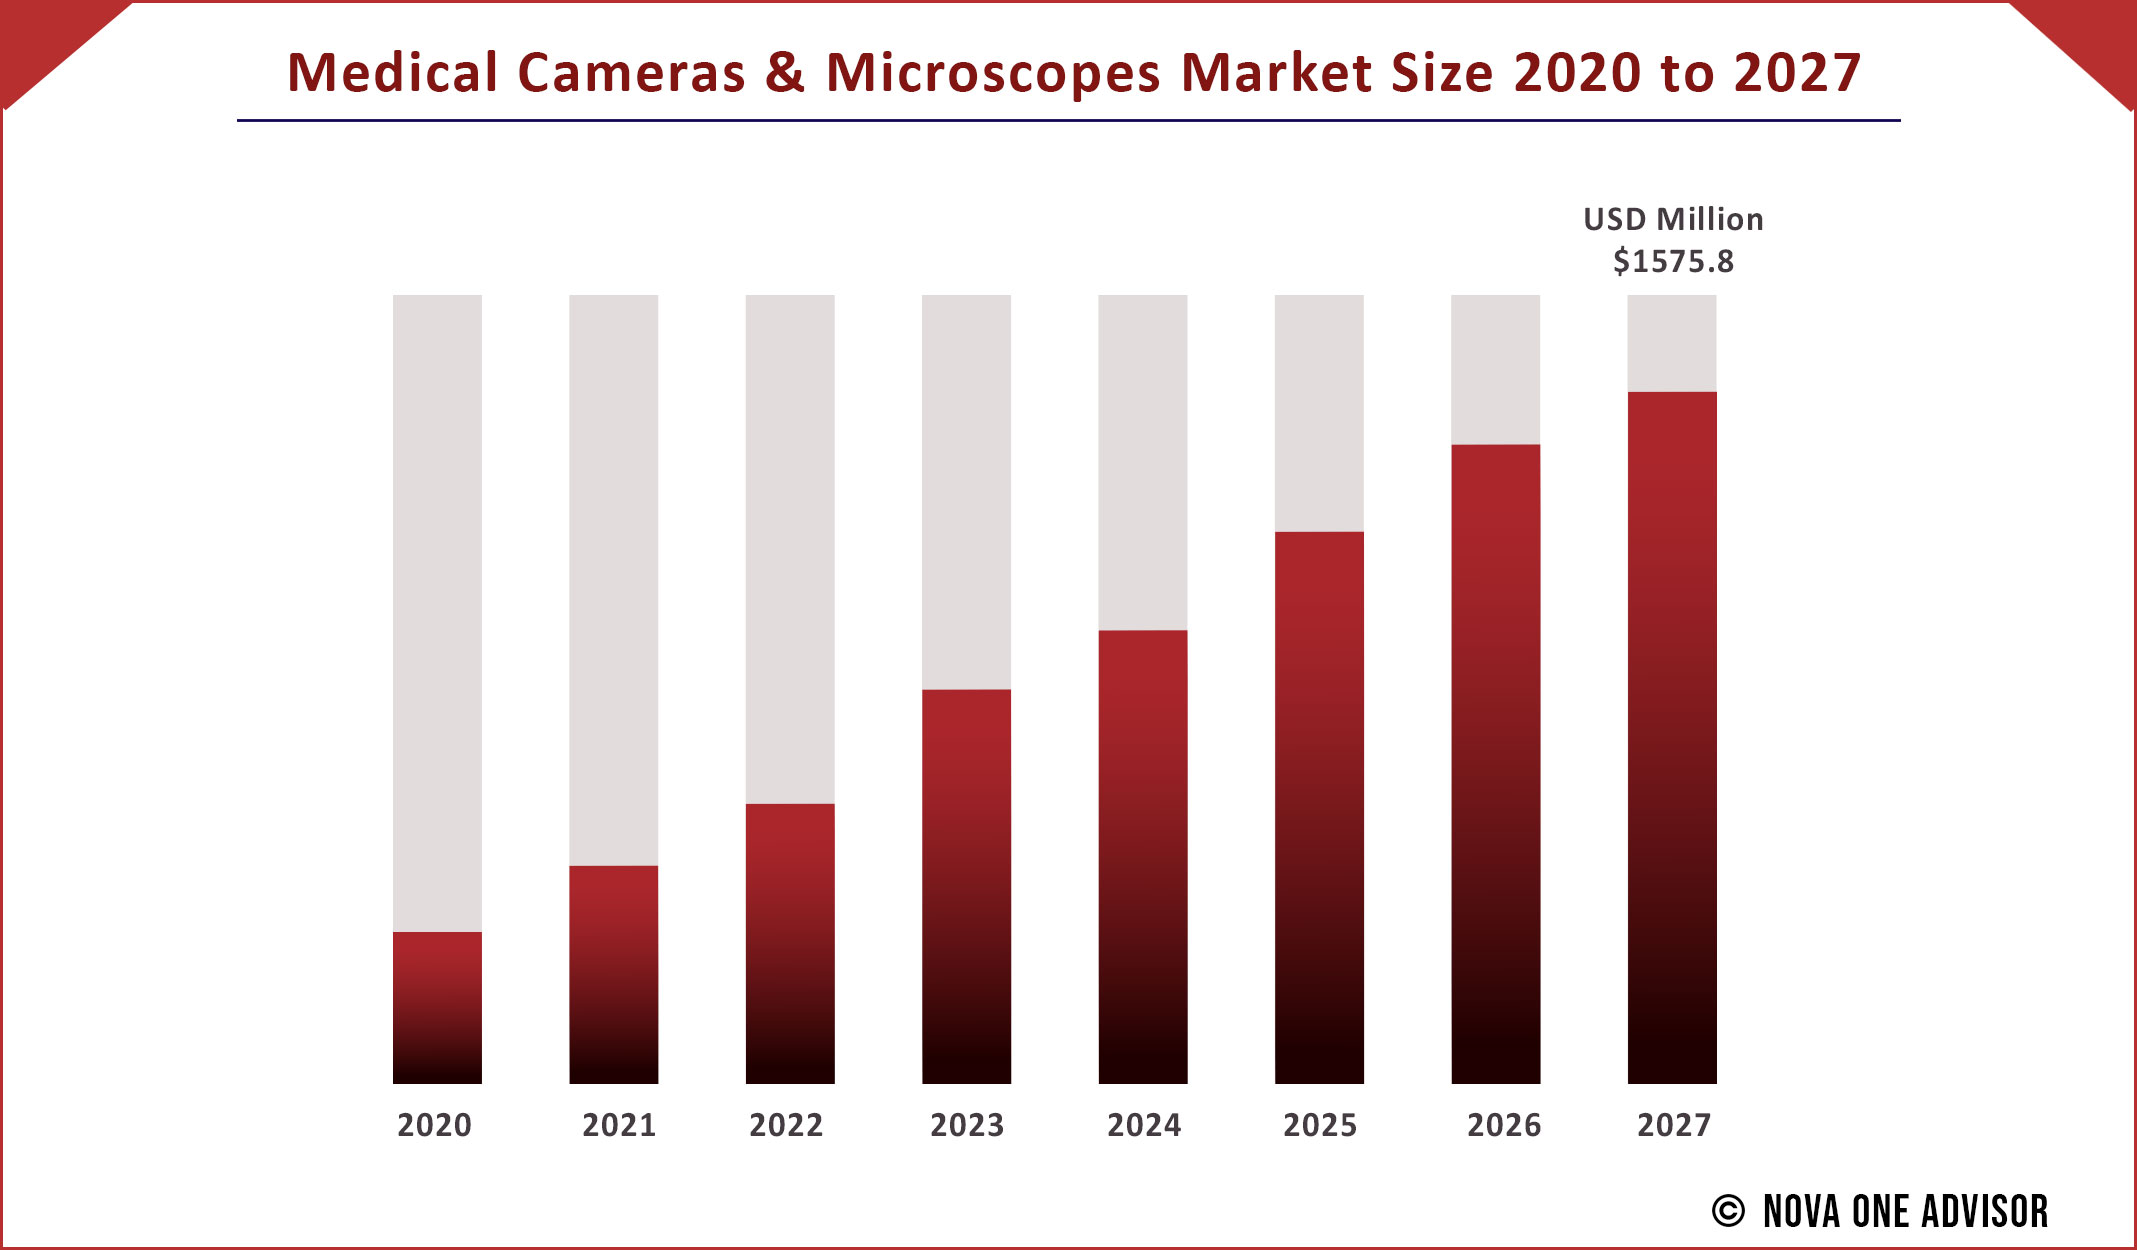 Medical Cameras & Microscopes Market Size 2020 to 2027